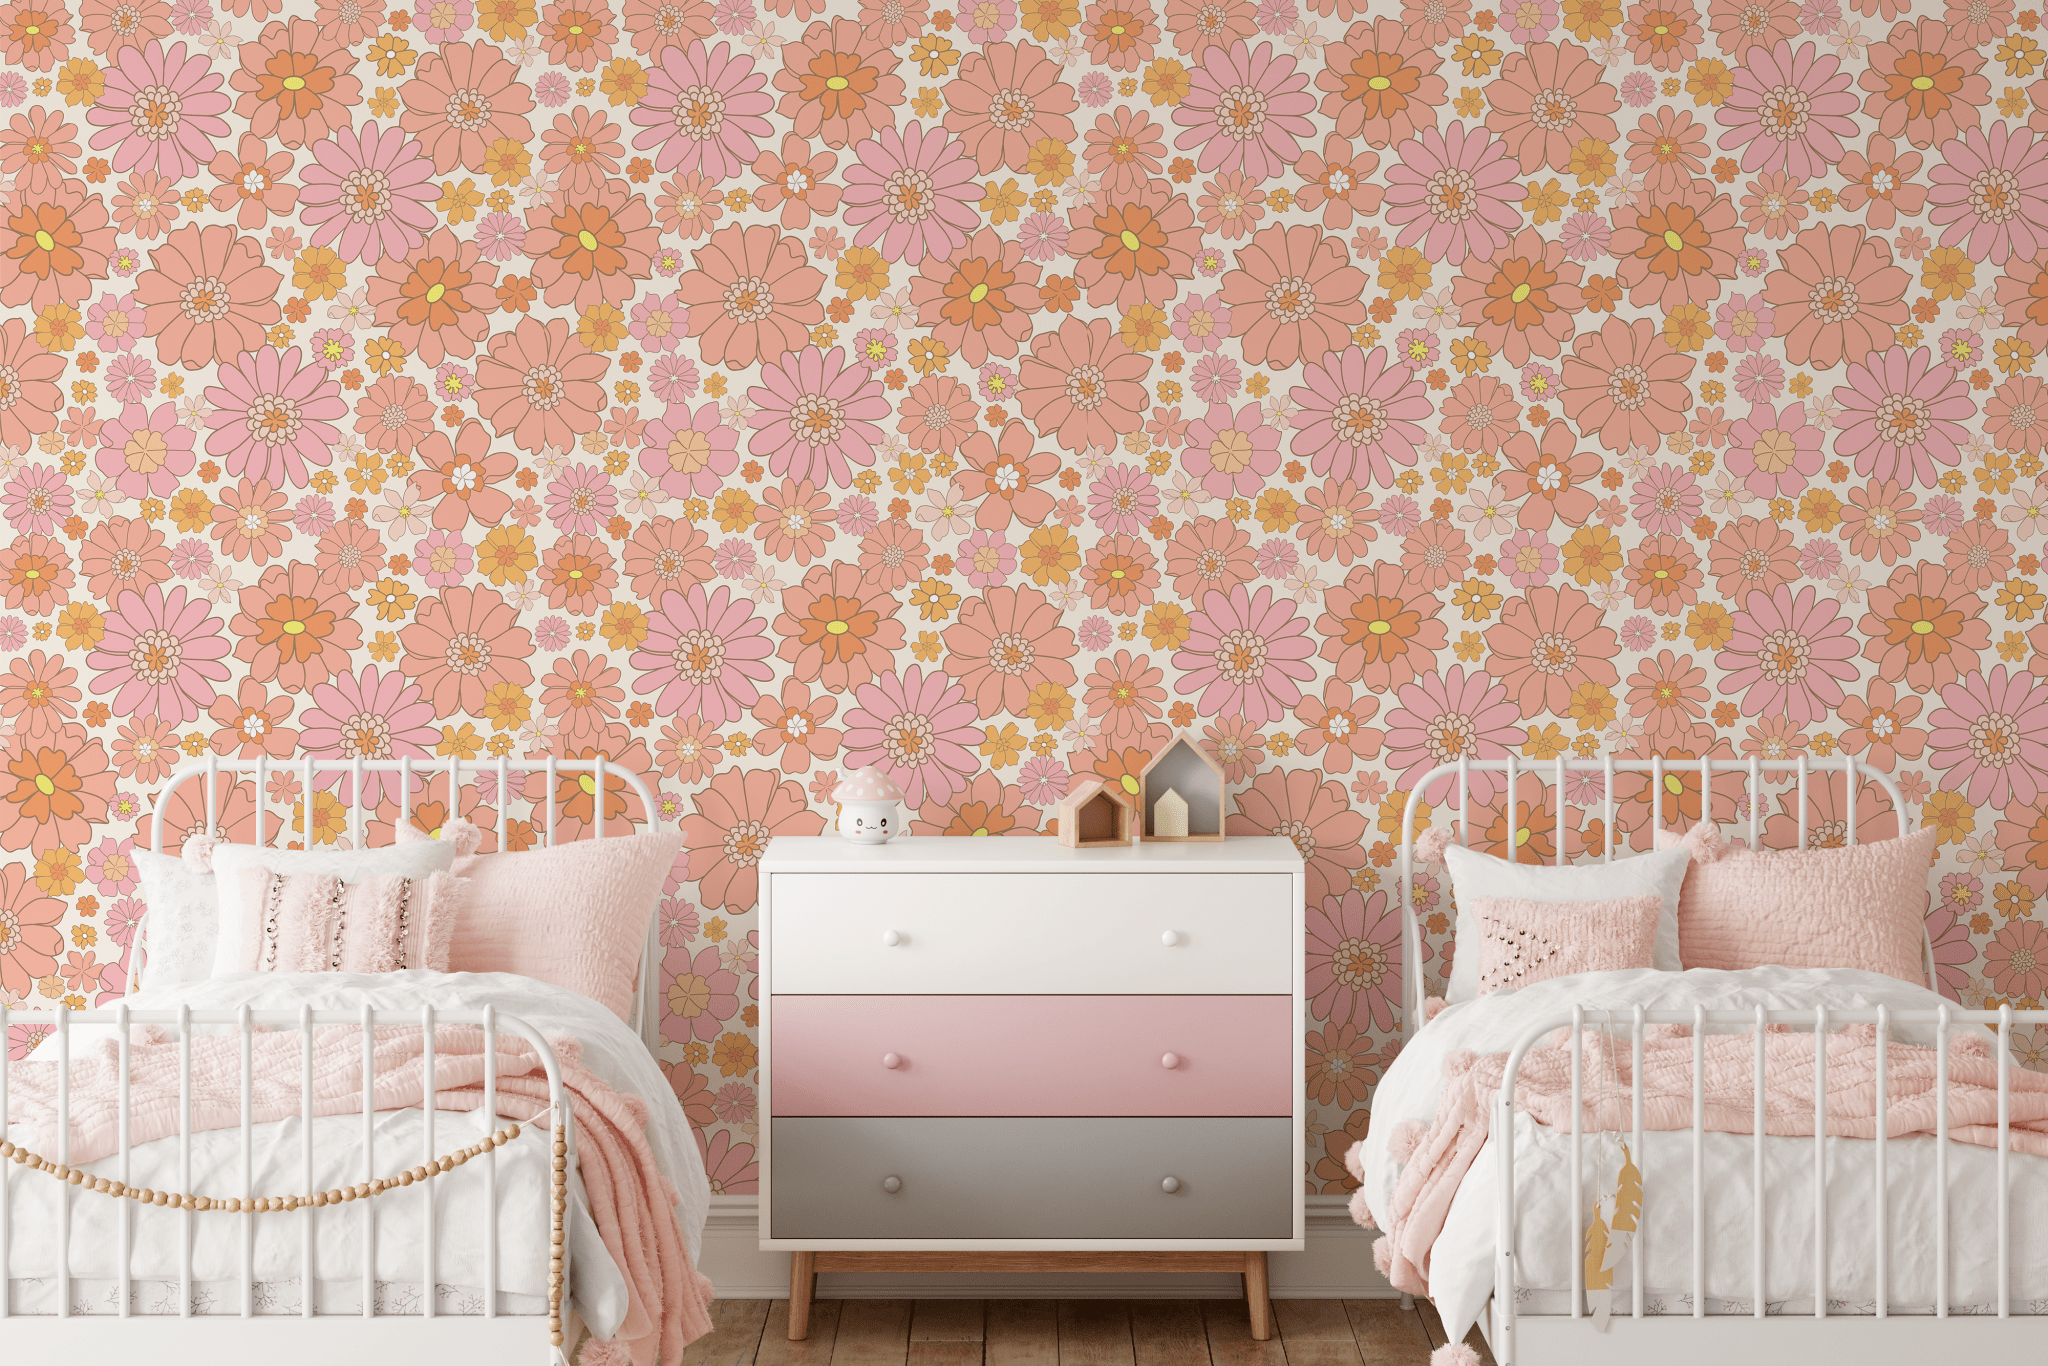 Charming children's bedroom with retro floral peel and stick wallpaper in shades of pink and orange, complemented by white and pink bedding and a stylish ombre dresser.